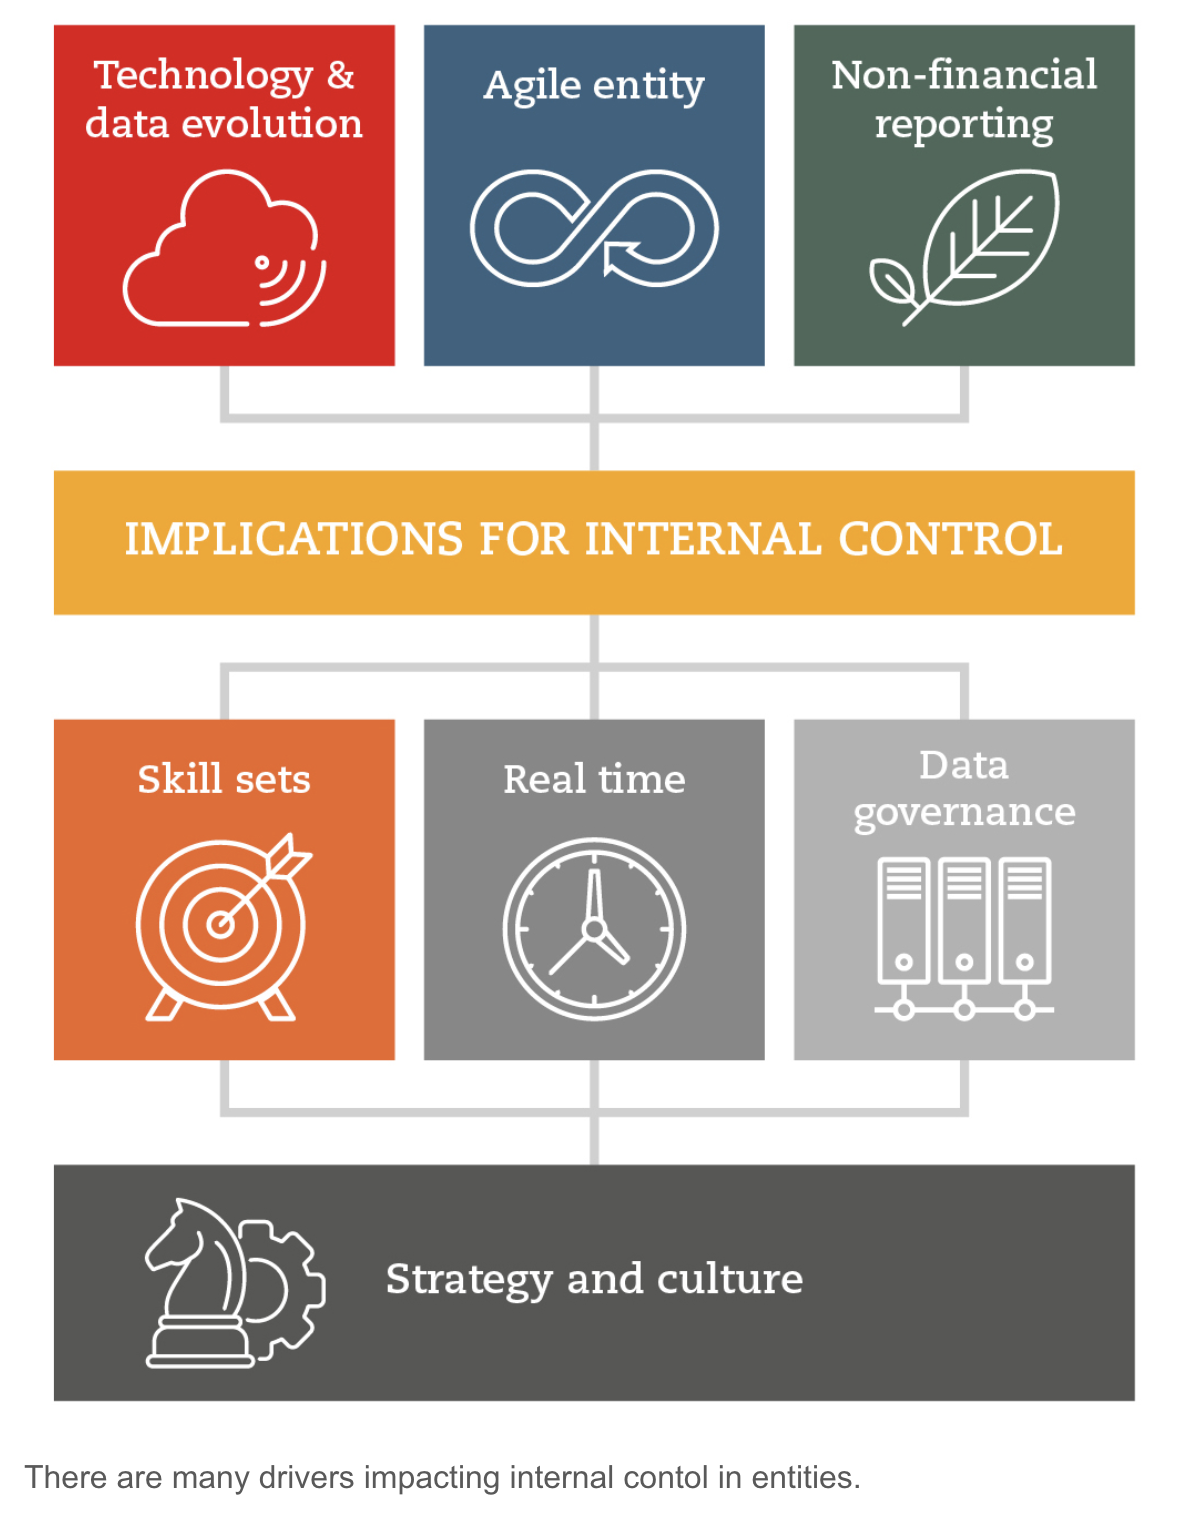 Challenges ahead for internal control in organisations